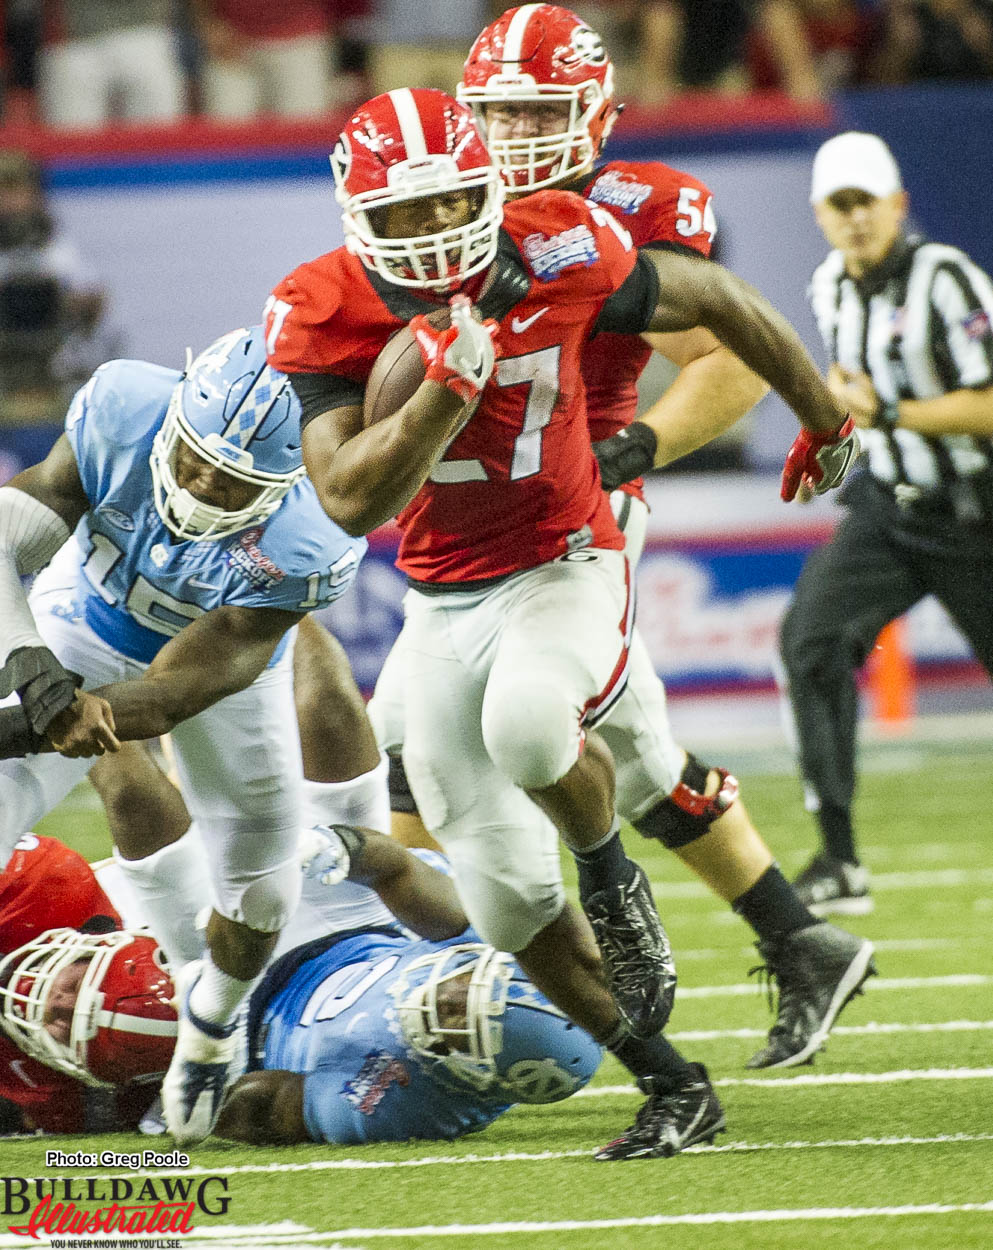 Nick Chubb breaks into open field on his game changing touchdown run